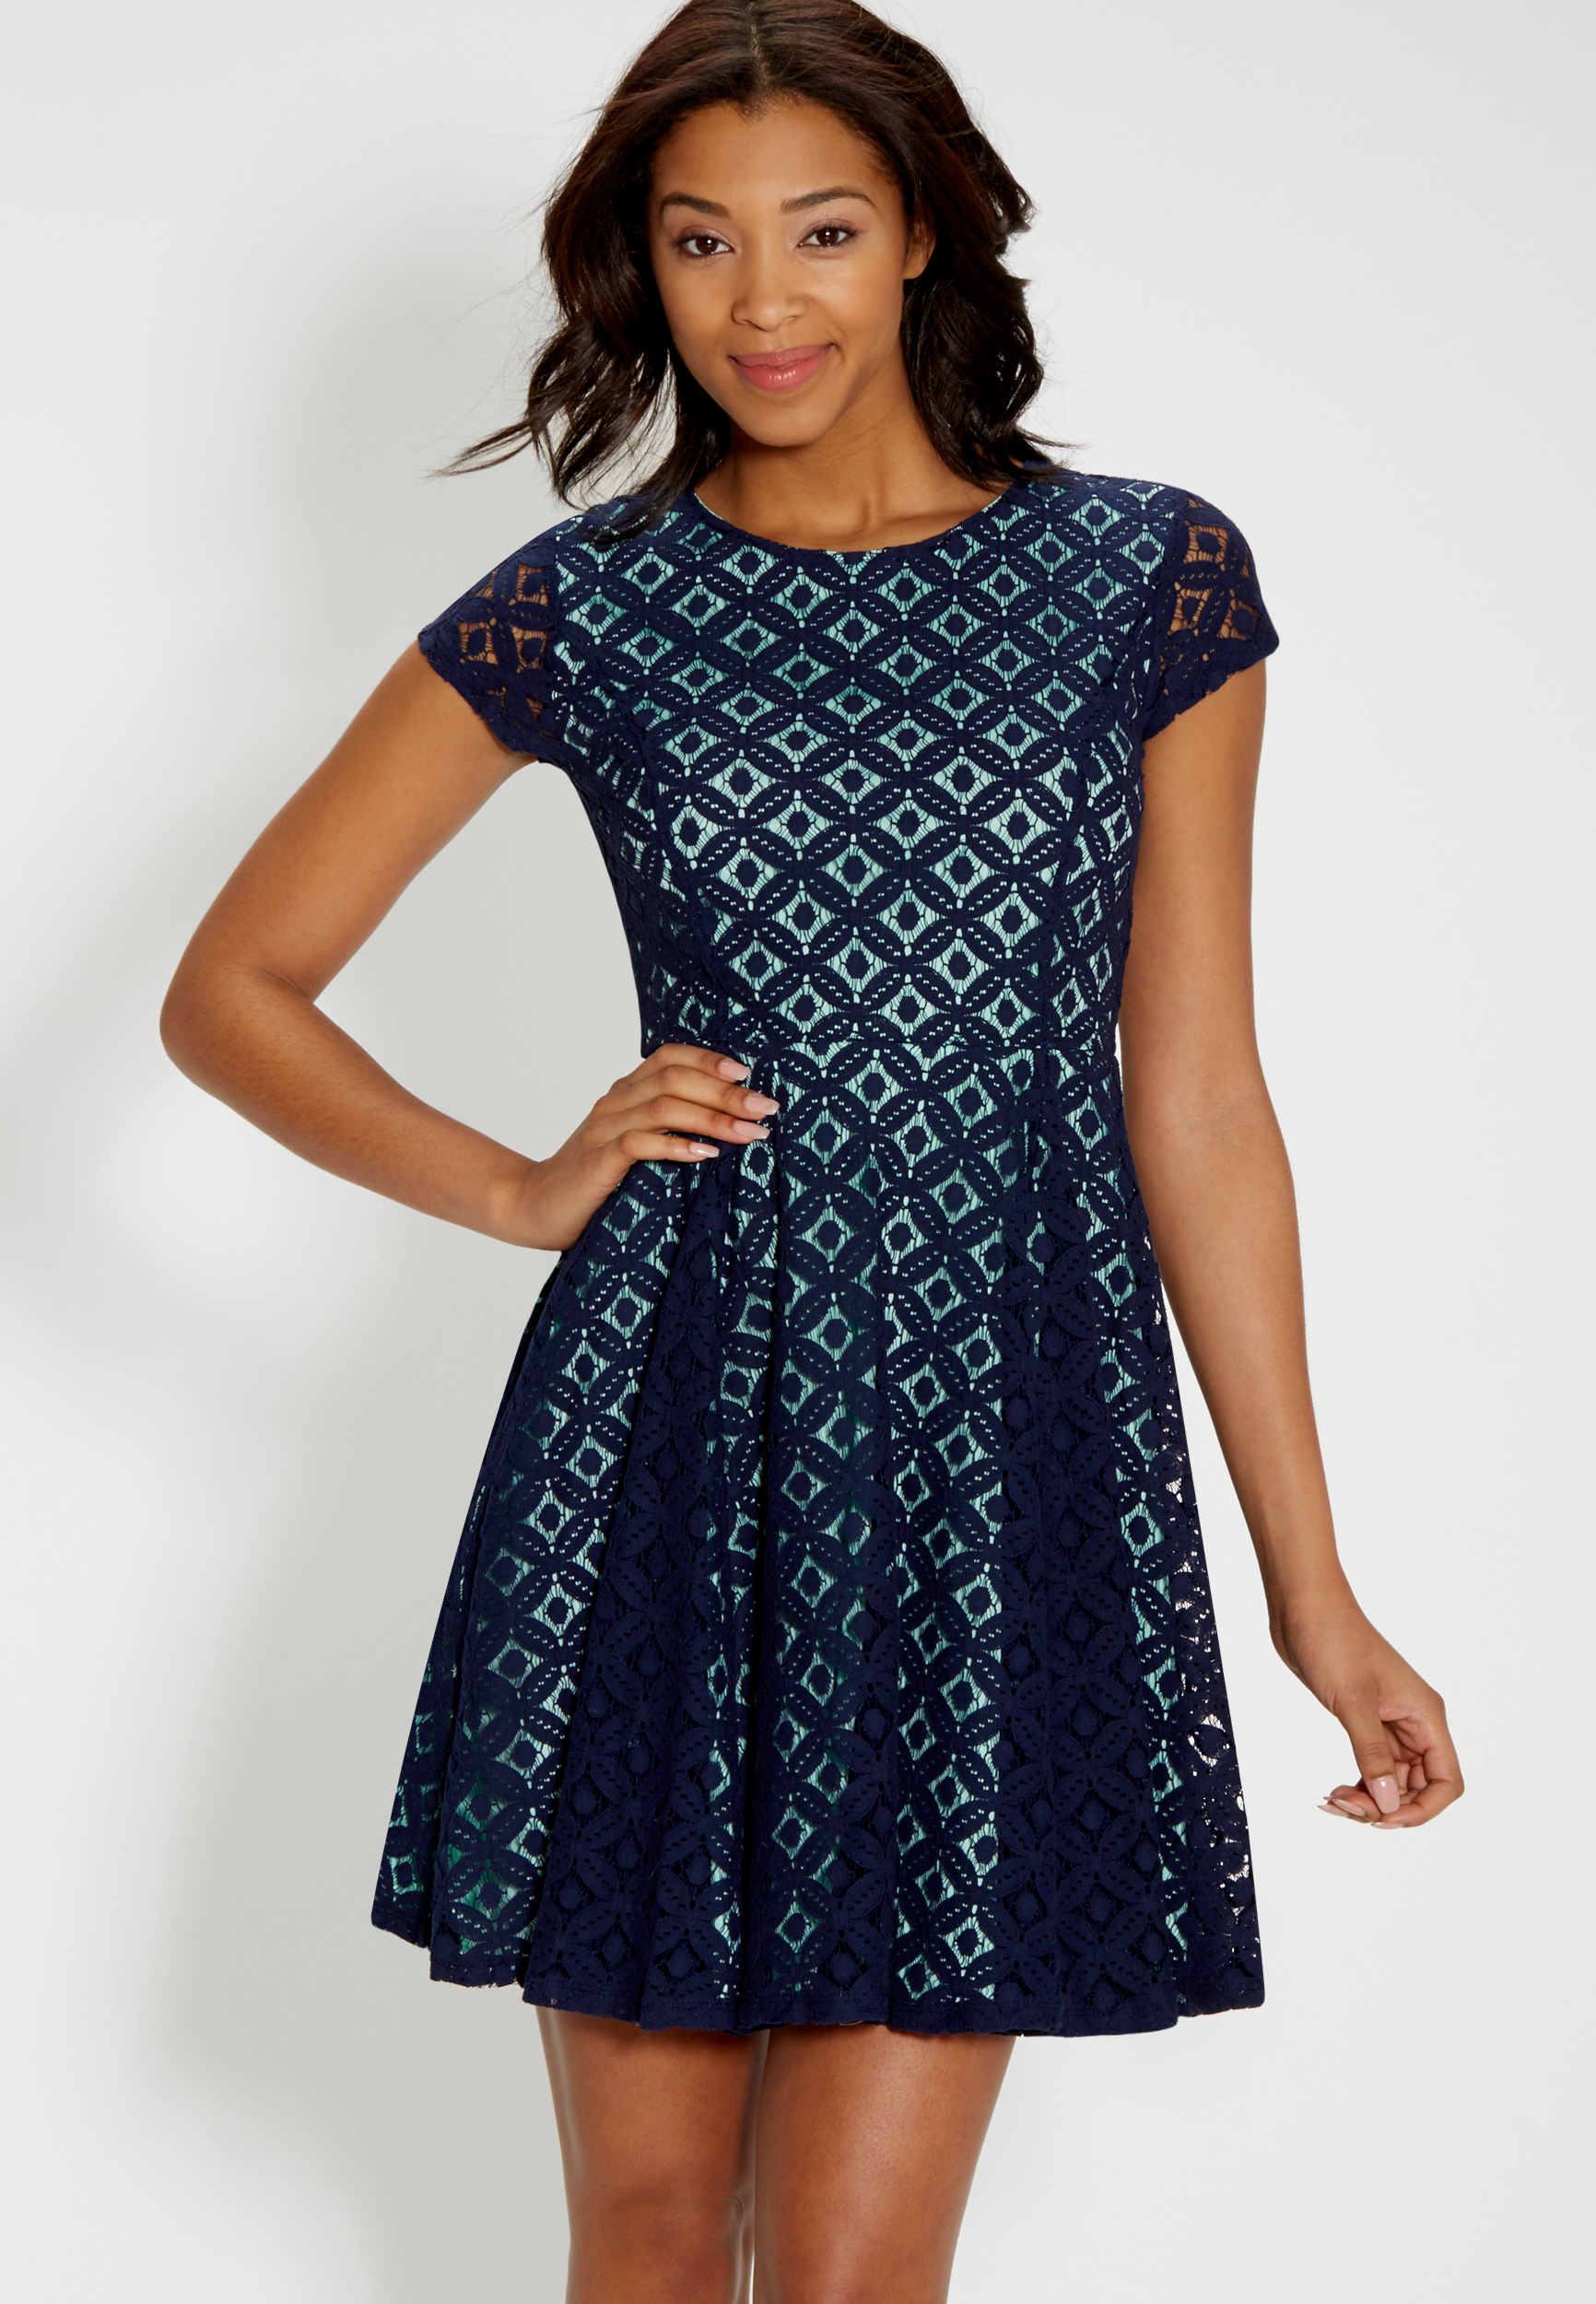 lacy dress with mint lining | maurices